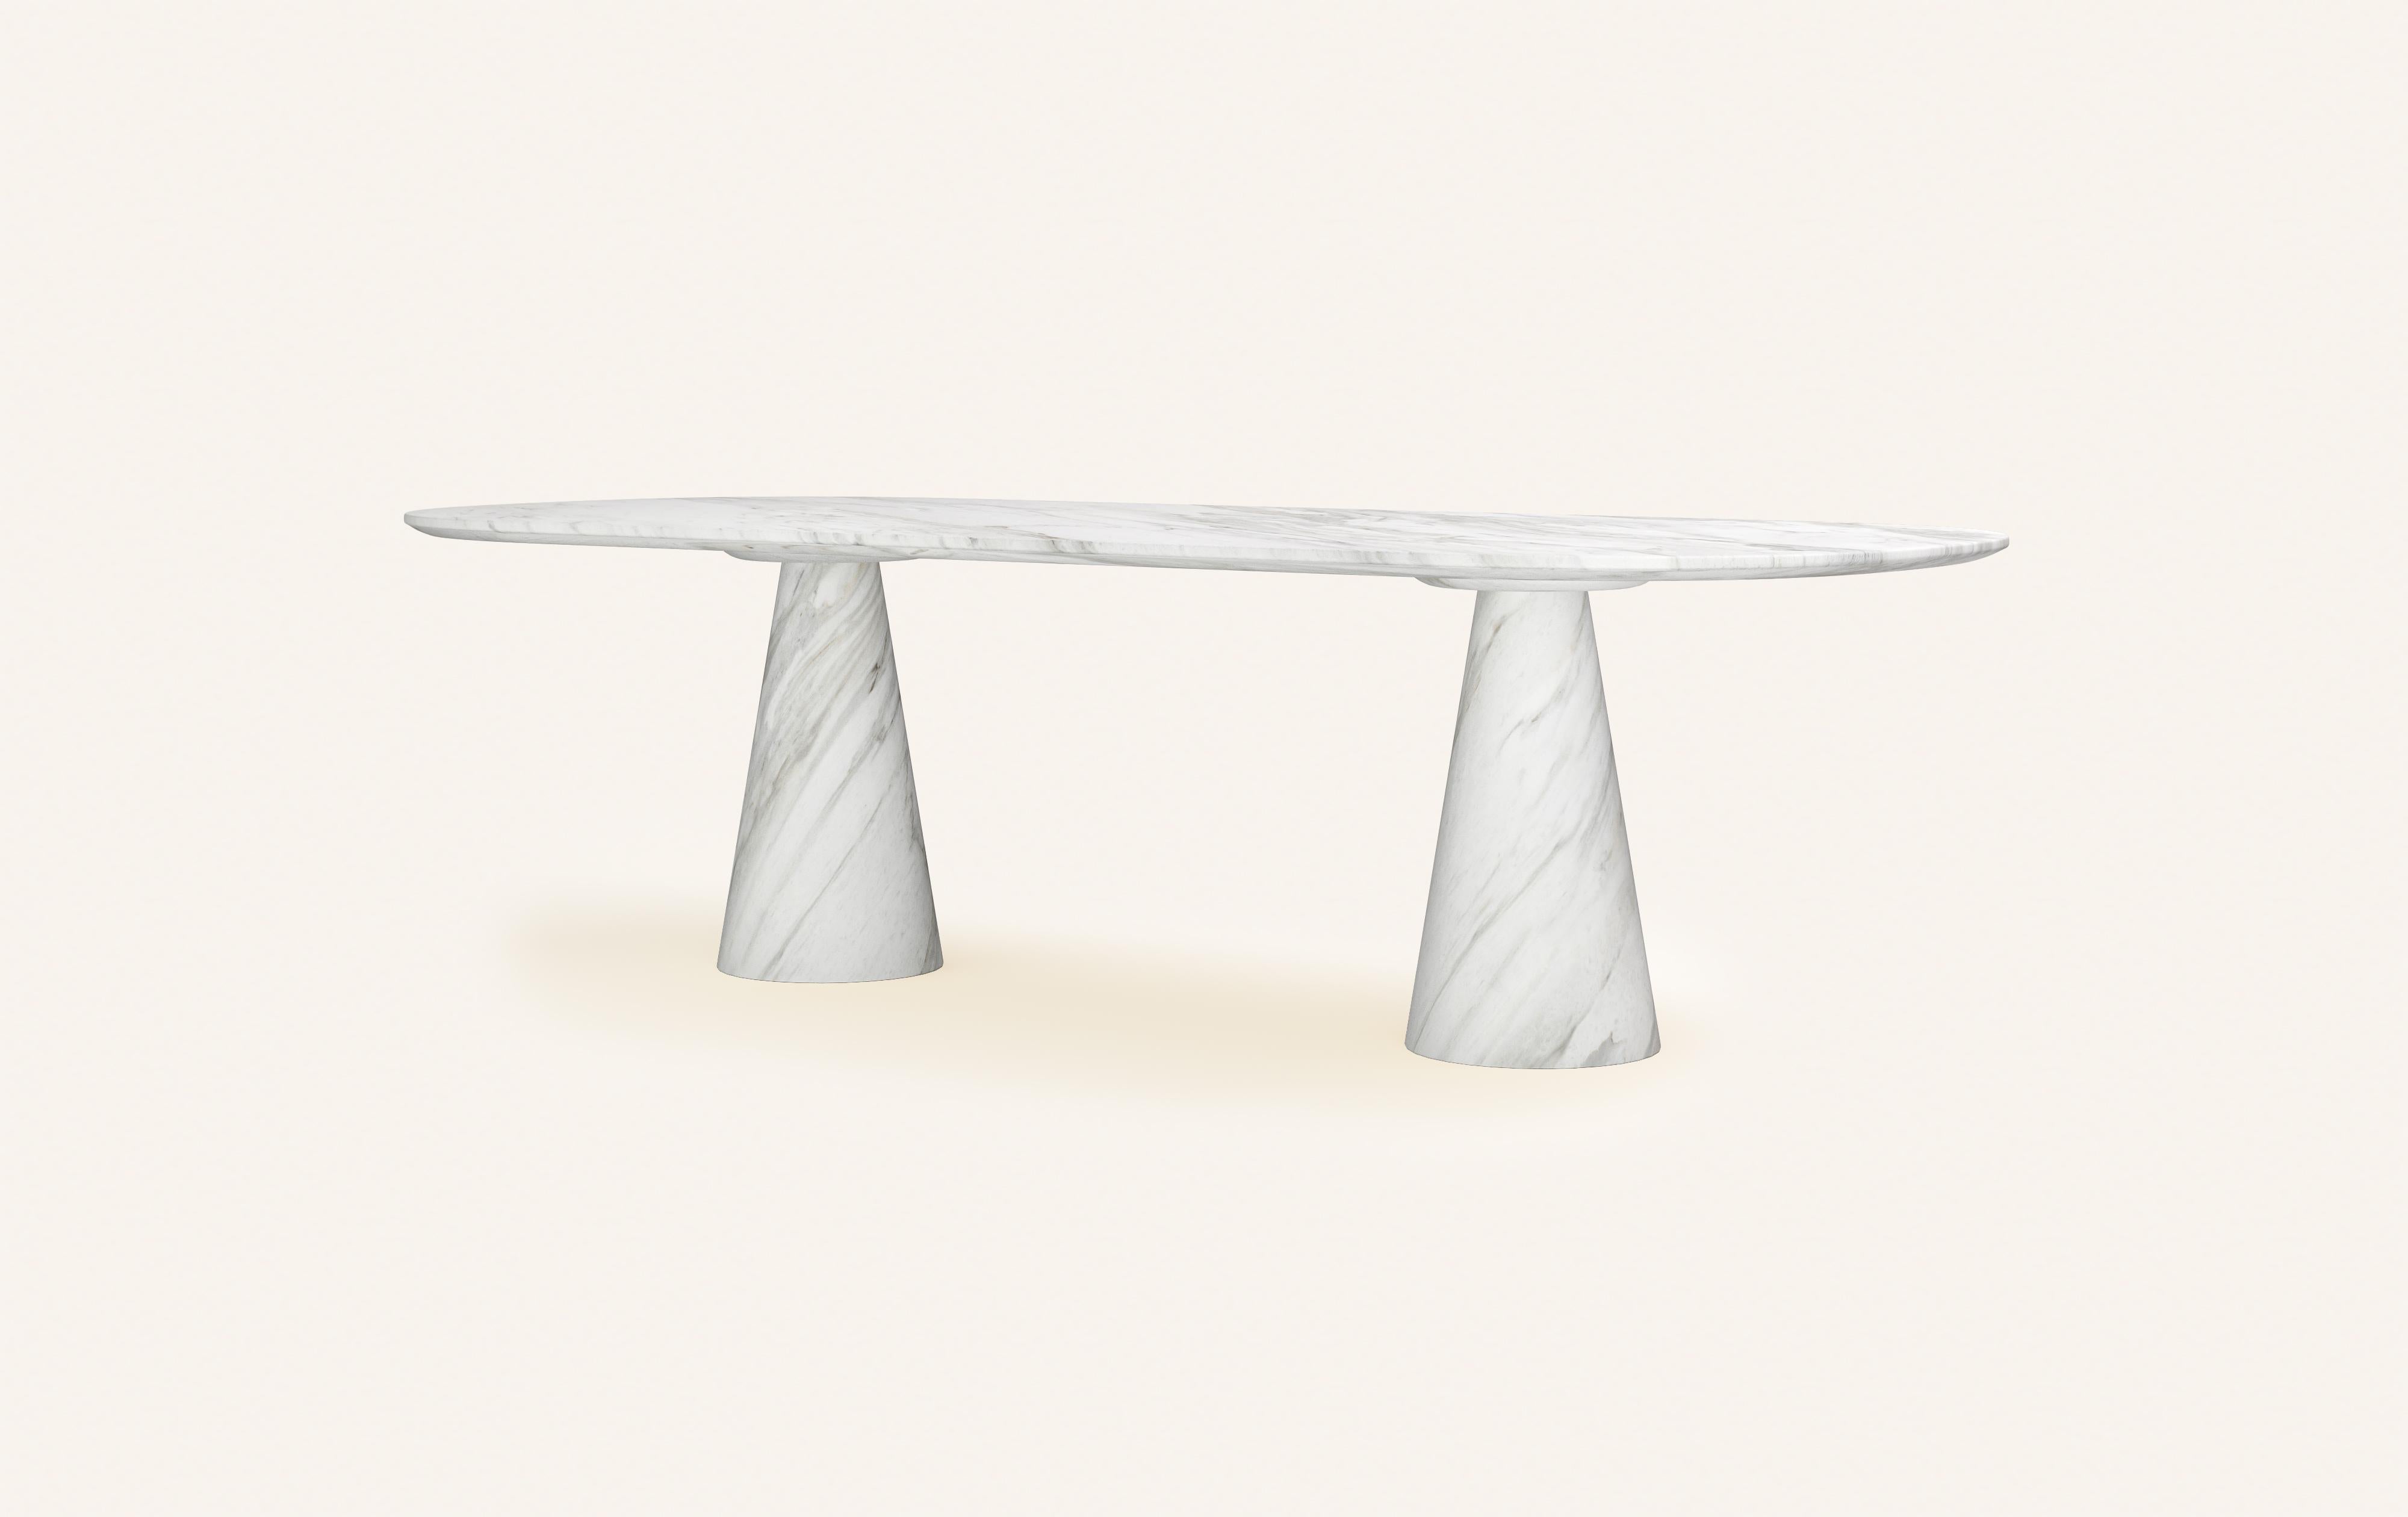 Organic Modern FORM(LA) Cono Oval Dining Table 96”L x 42”W x 30”H Volakas White Marble For Sale